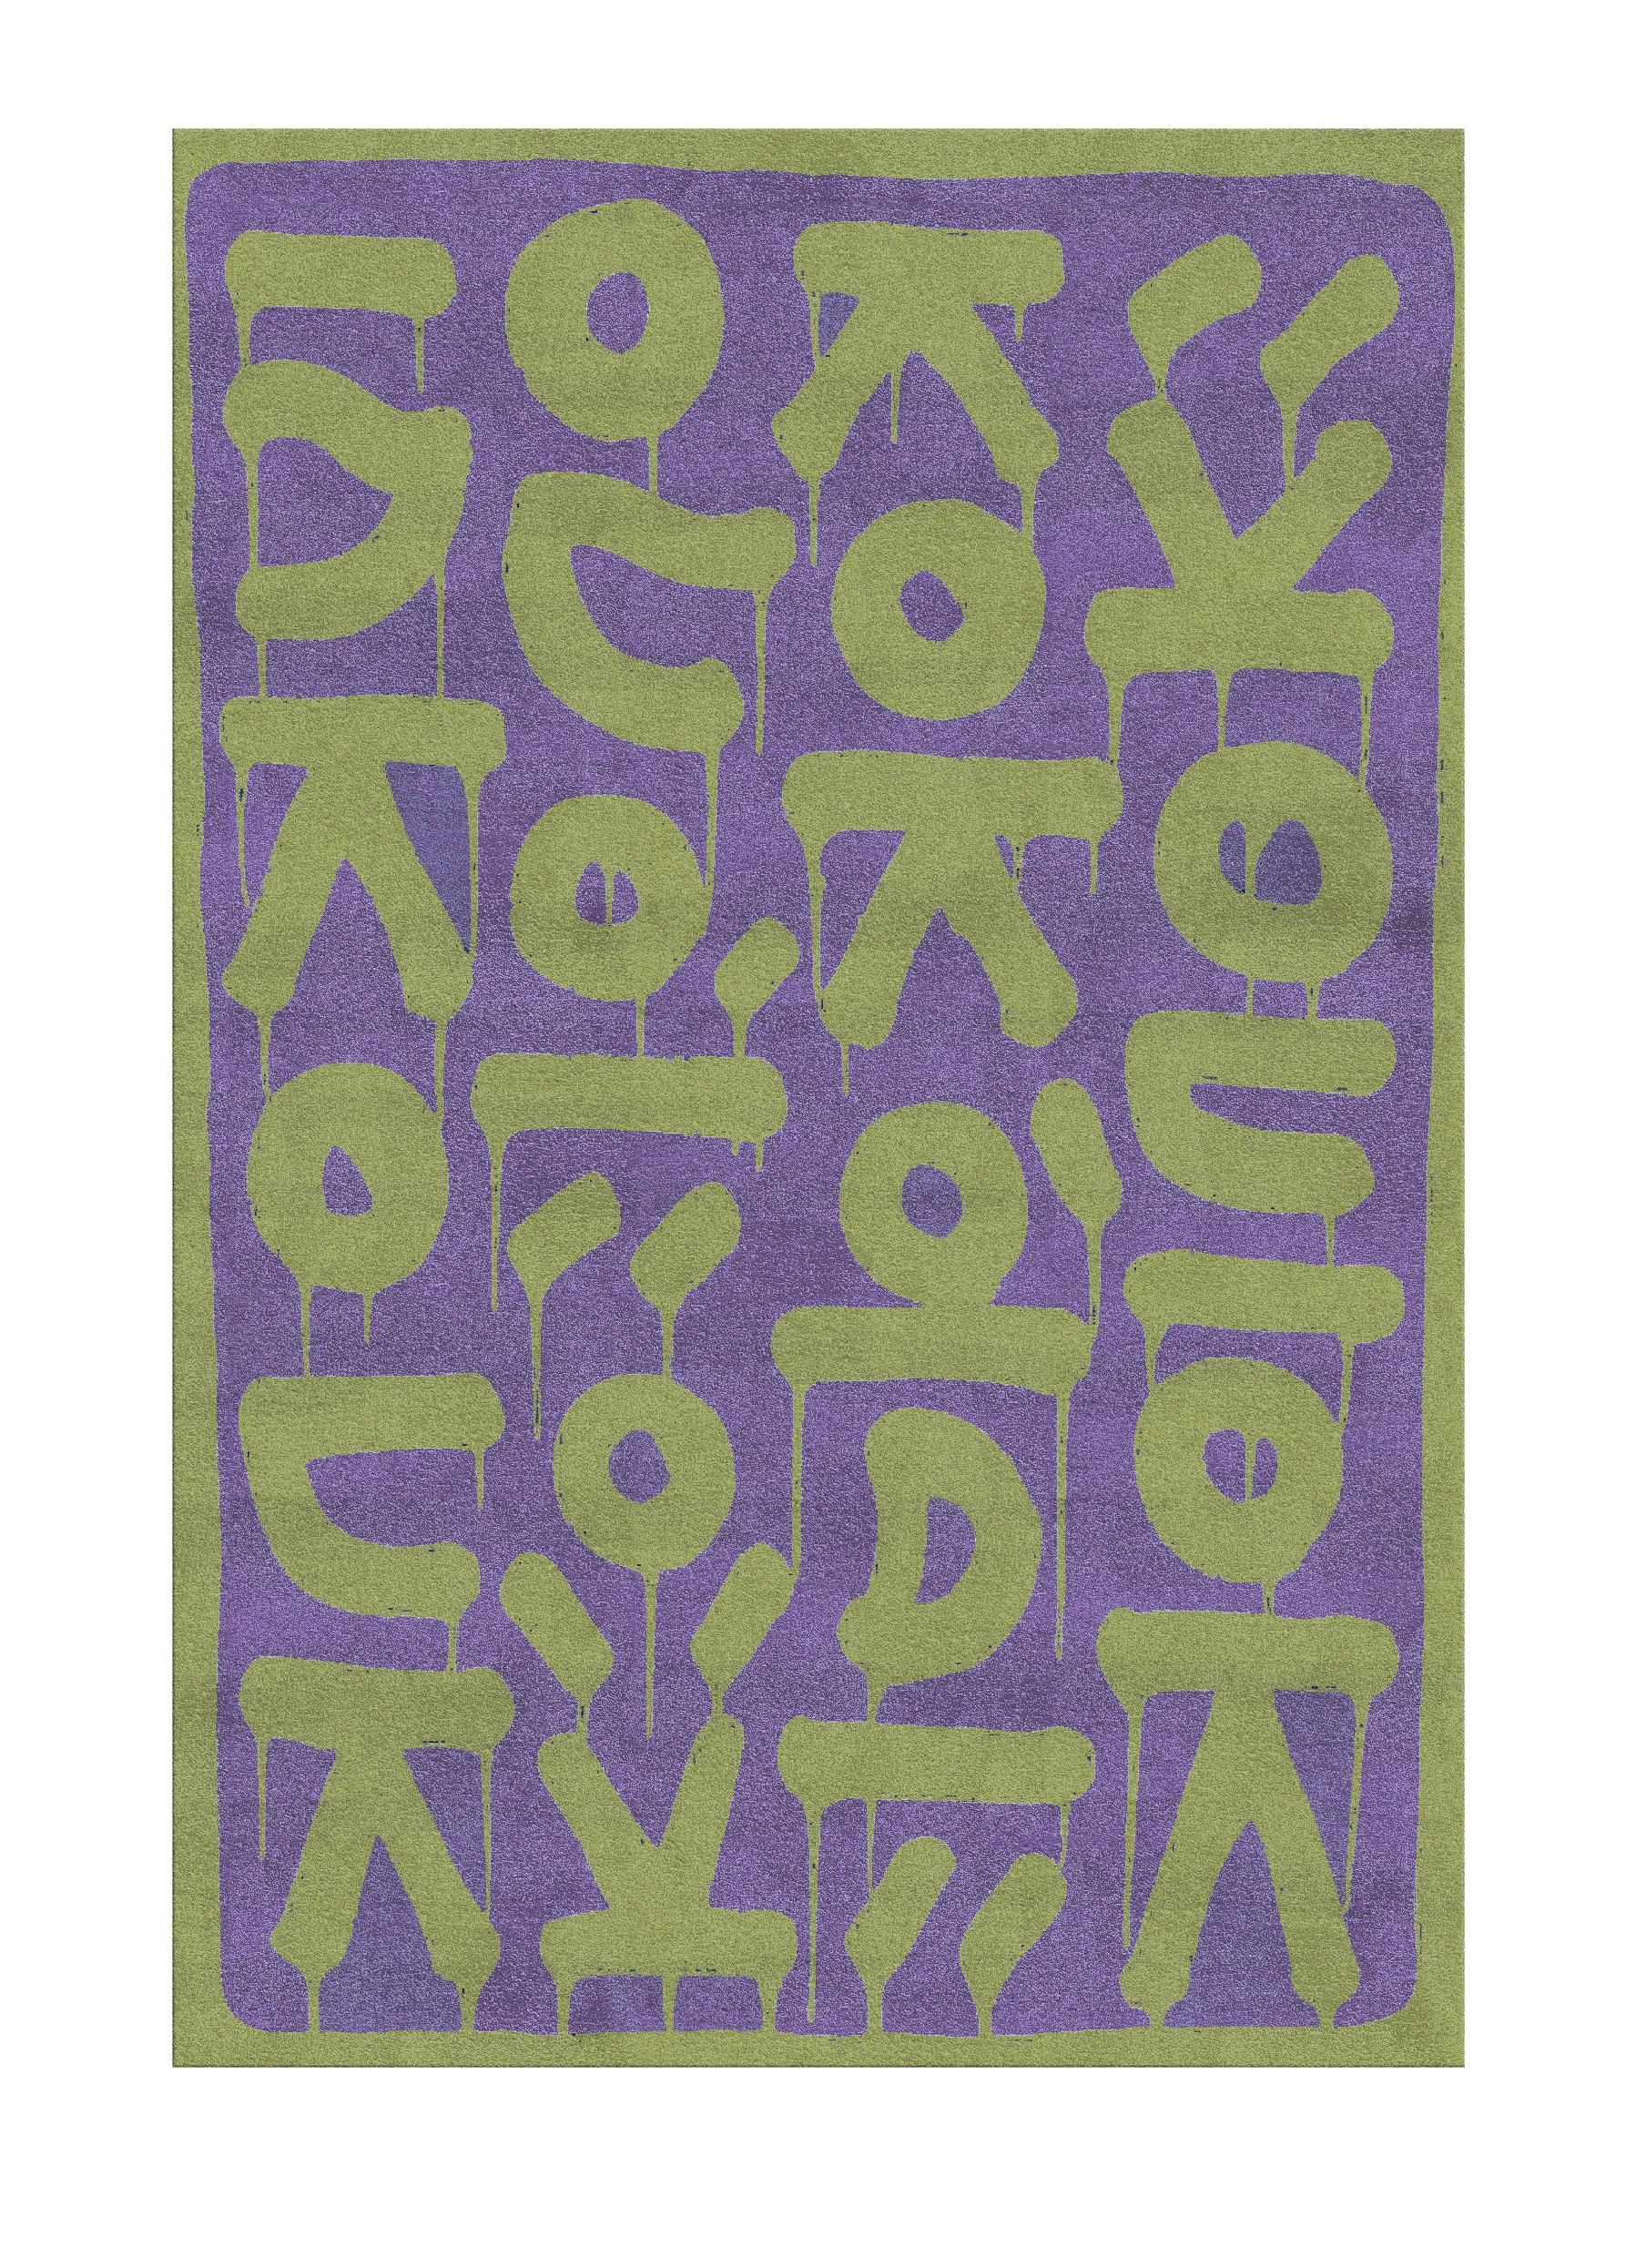 Letter rug IV by Raul
Dimensions: D 300 x W 200 cm
Materials: viscose, linen
Available in other colors.

The ‘Letter’ rug comes from a series entitled “Nomadic signs” representing all the signs and symbols encountered by the artist during his